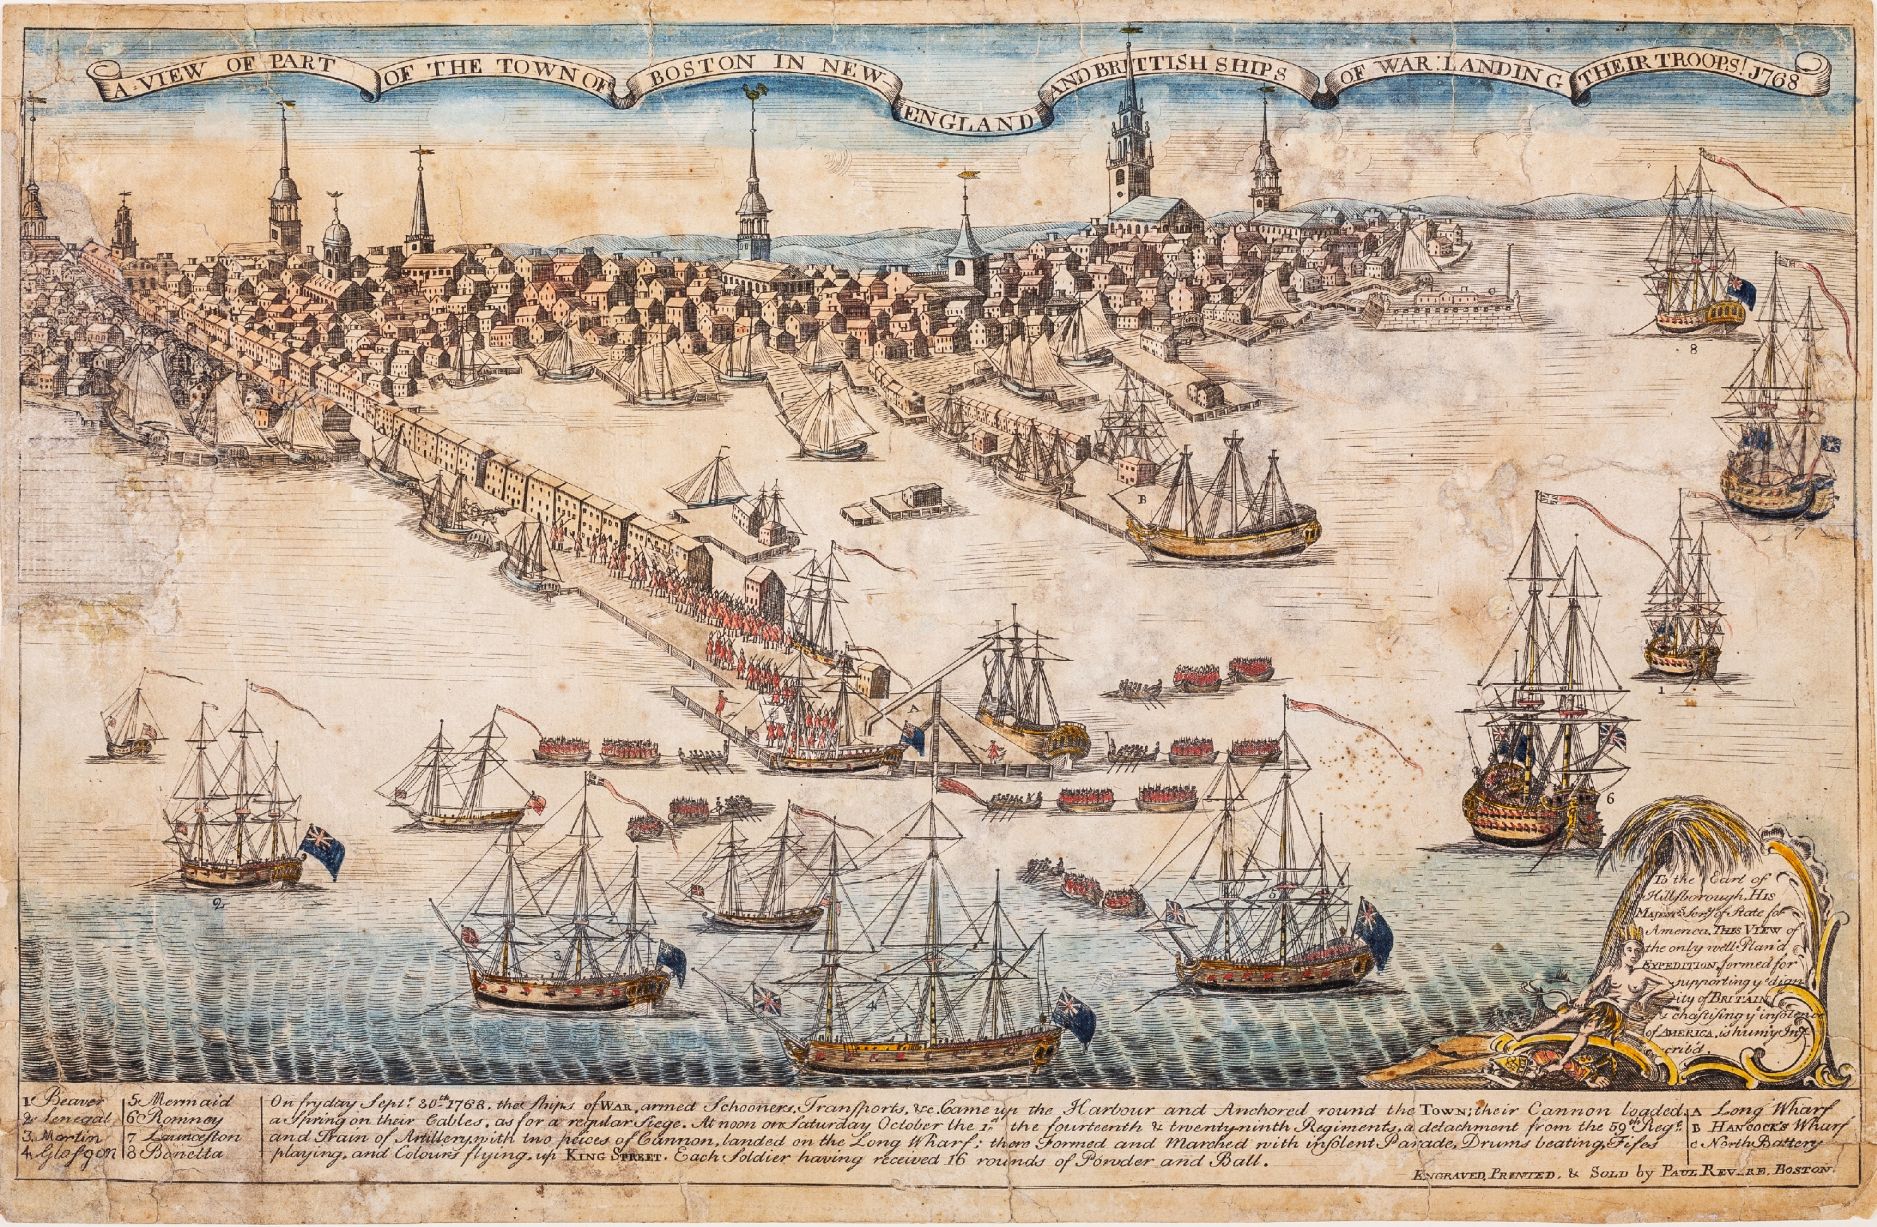 In 1774 and '75, British warships entered Boston harbor with their gun ports open and then landed troops with bayonets fixed to occupy the city, spurring colonial resistance. The rhetoric of the revolutionaries included the claim that Britain sought to enslave the colonists. American Antiquarian Society